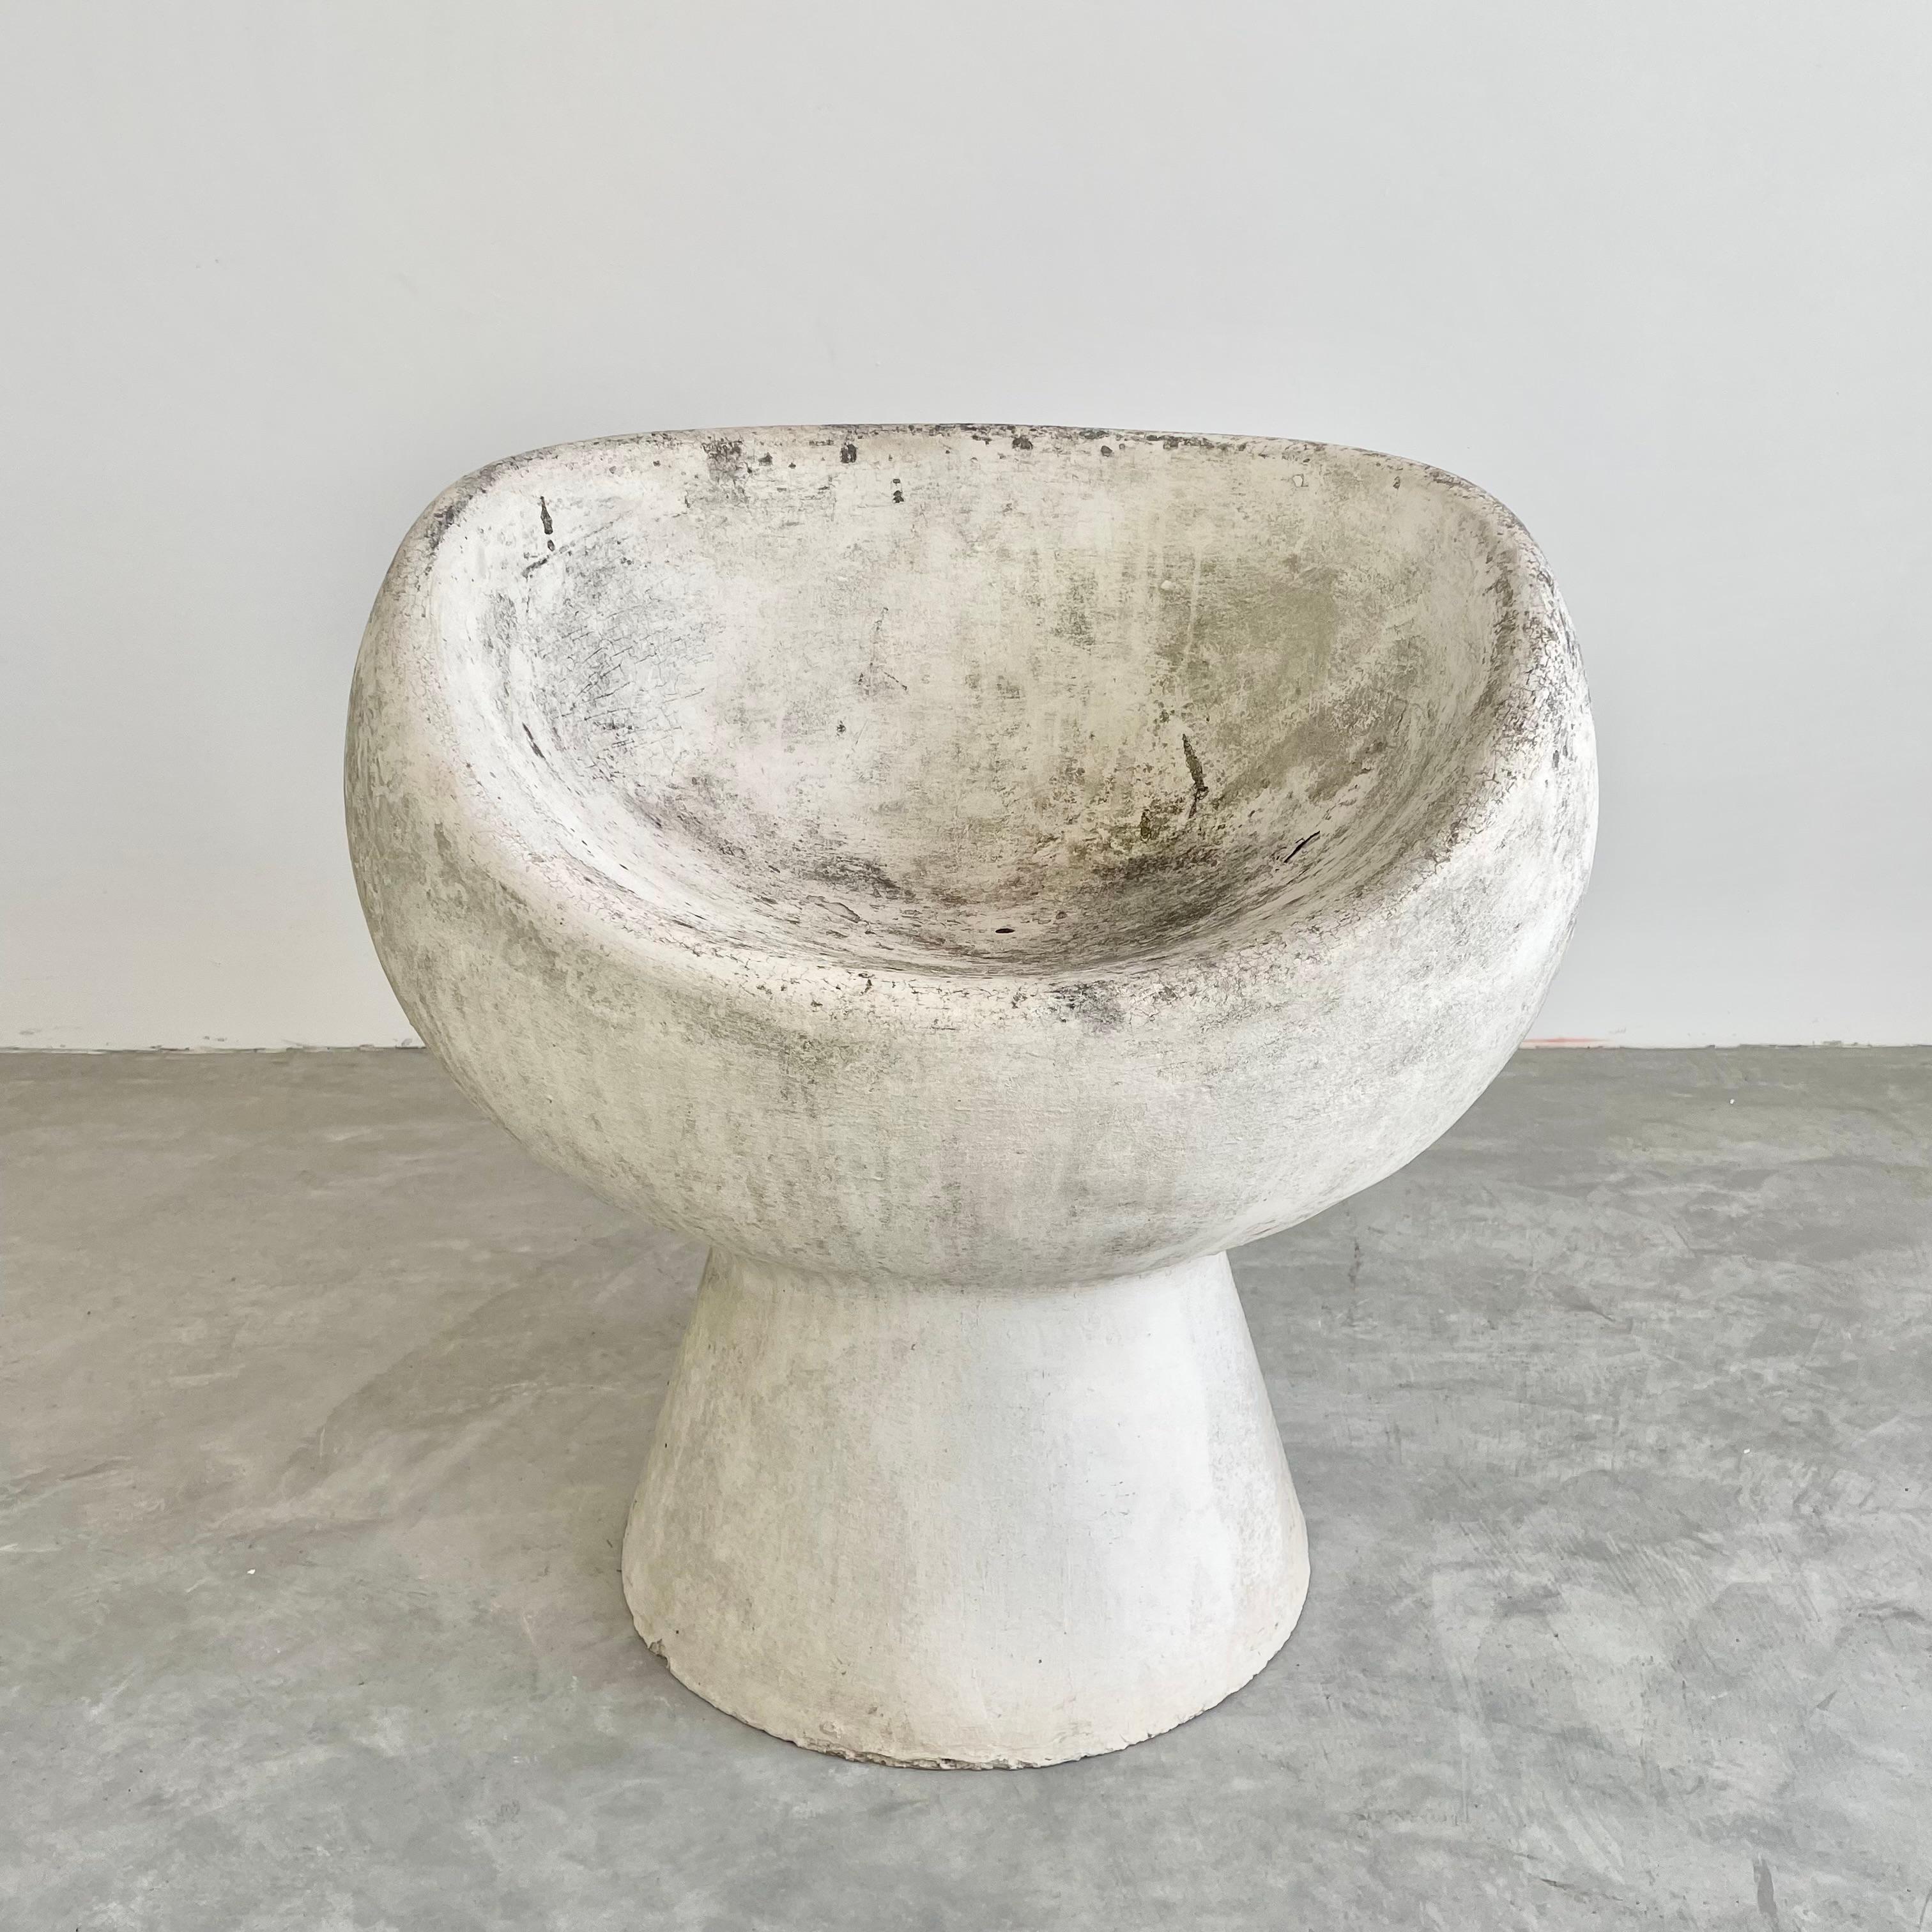 Stunning concrete pod chair designed by Swiss Architect Willy Guhl. Hand made in Switzerland by Eternit in the 1960s. Excellent patina. Factory drilled hole for water to drain. Great sculptural pieces. Perfect for indoors or outside. Priced